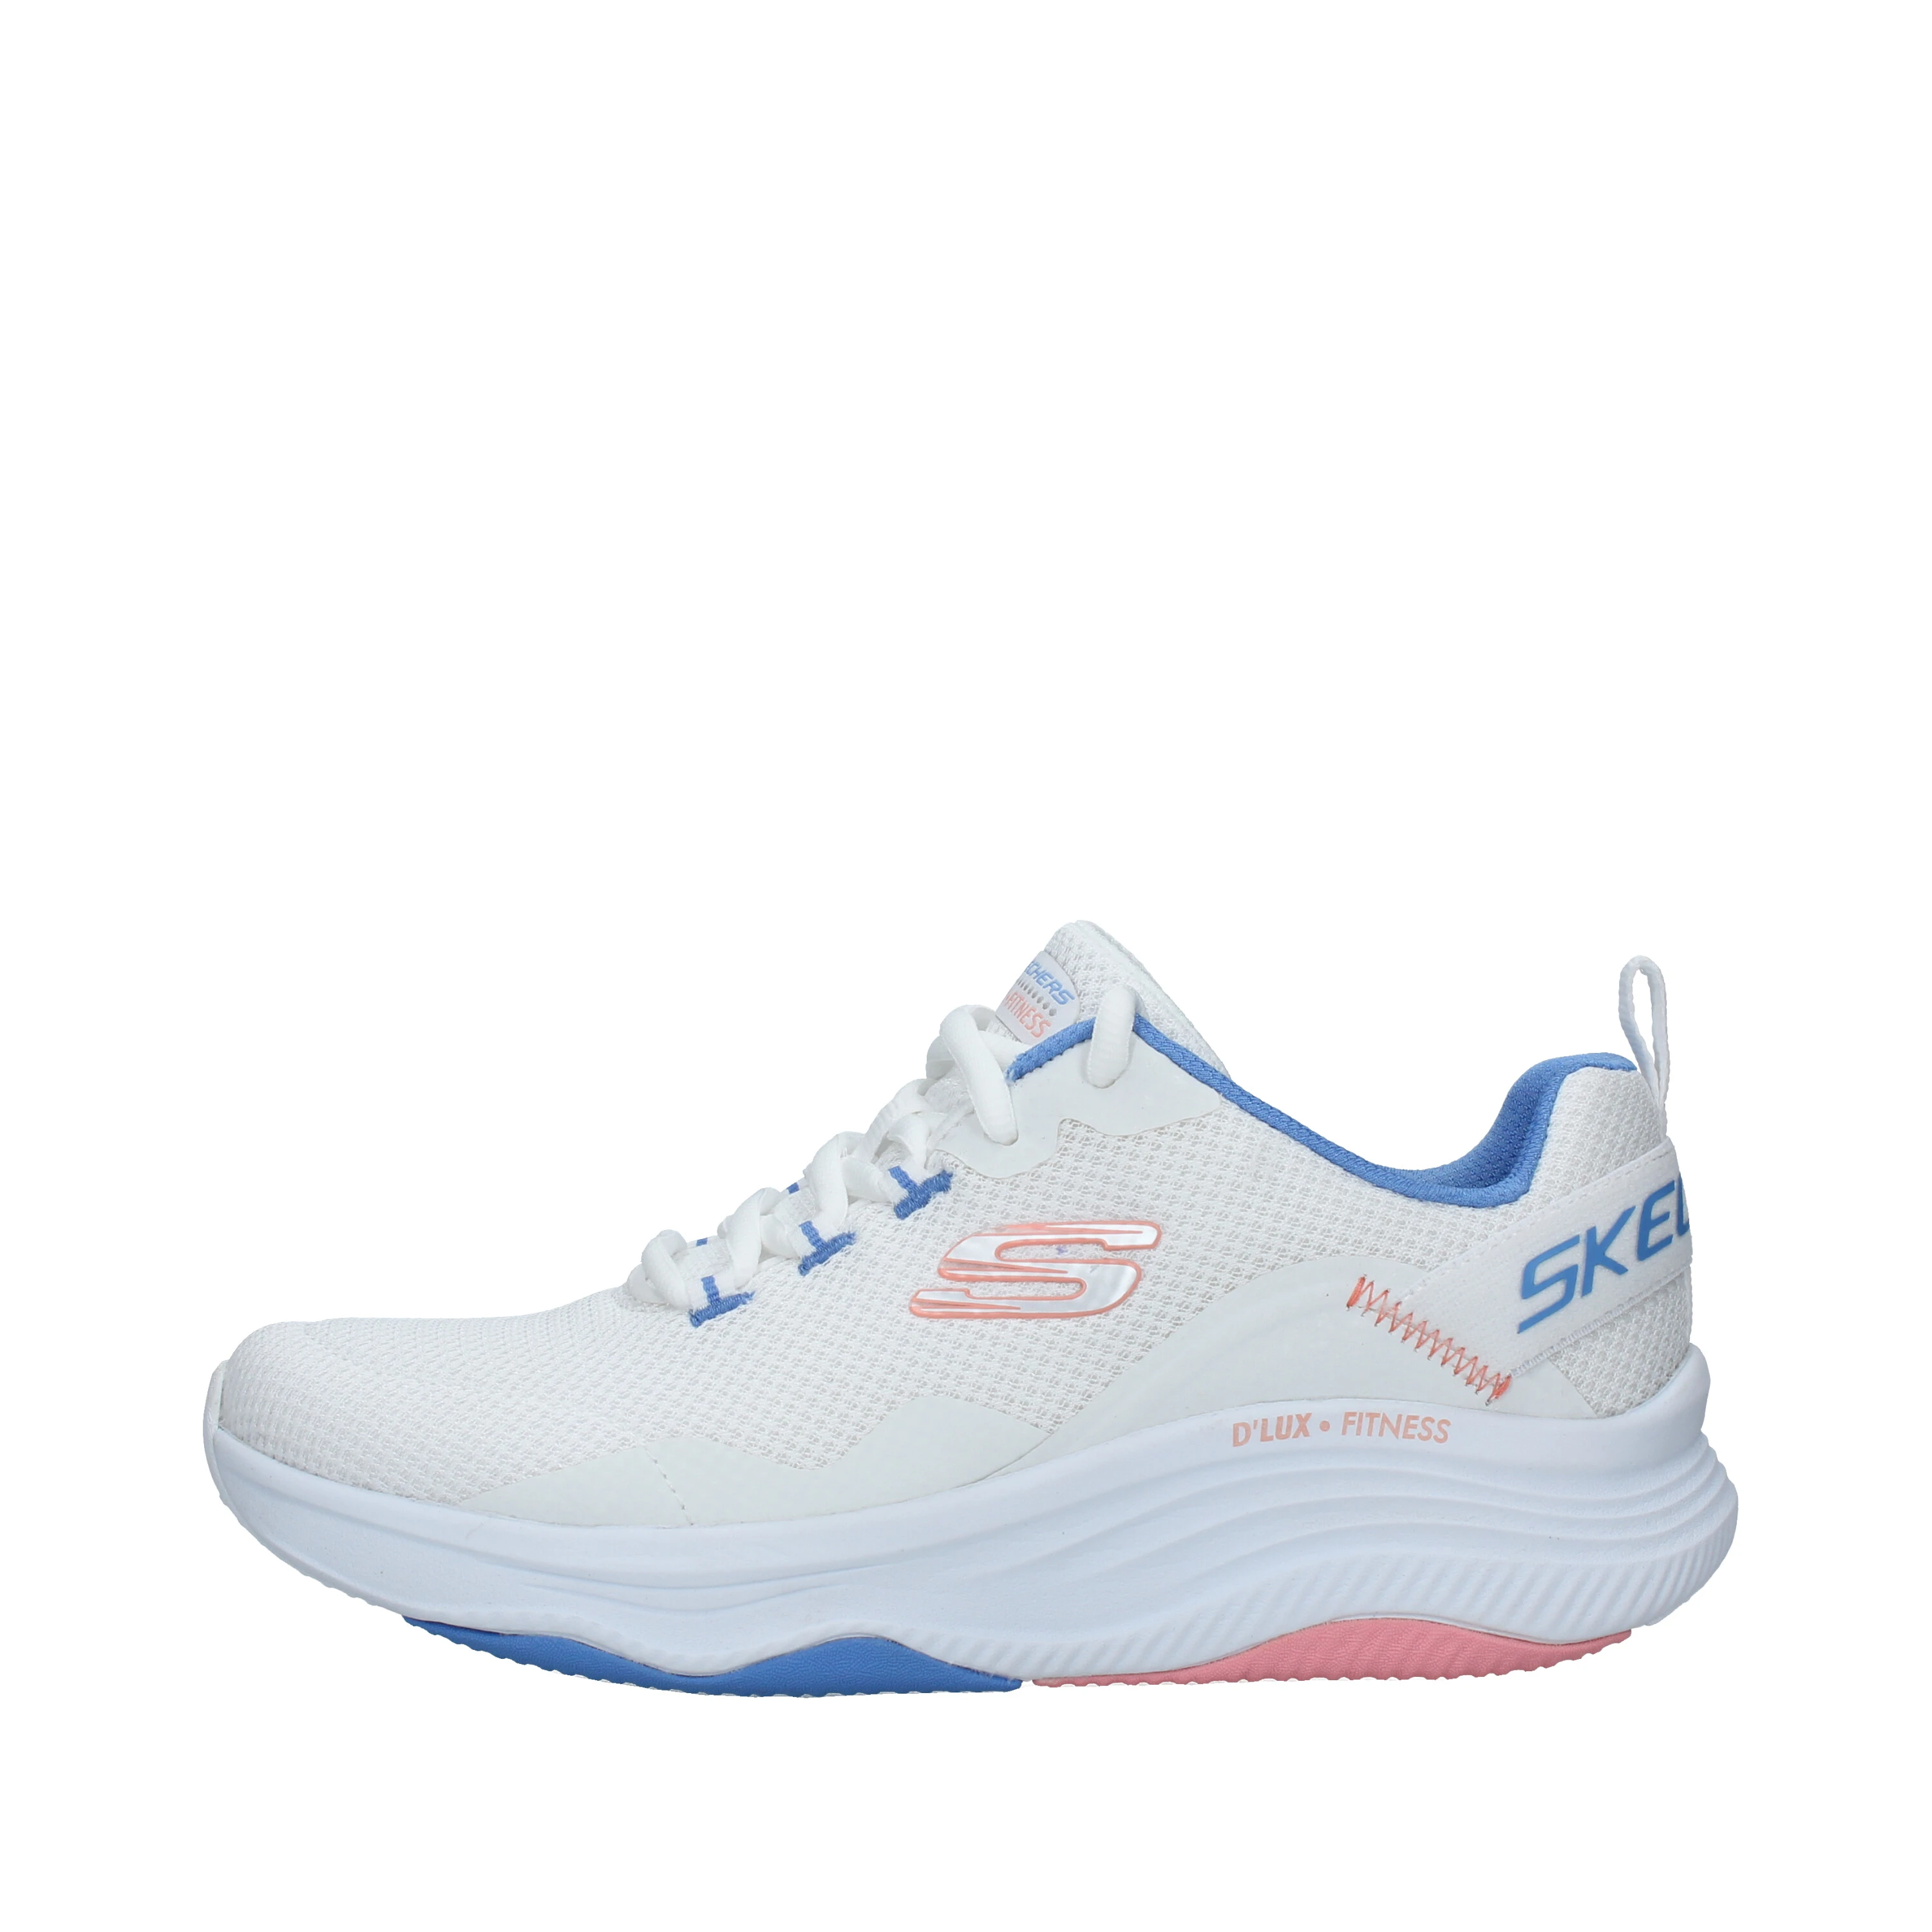 SNEAKERS MULTICOLORE D'LUX FITNESS ROAM FREE DONNA BIANCO